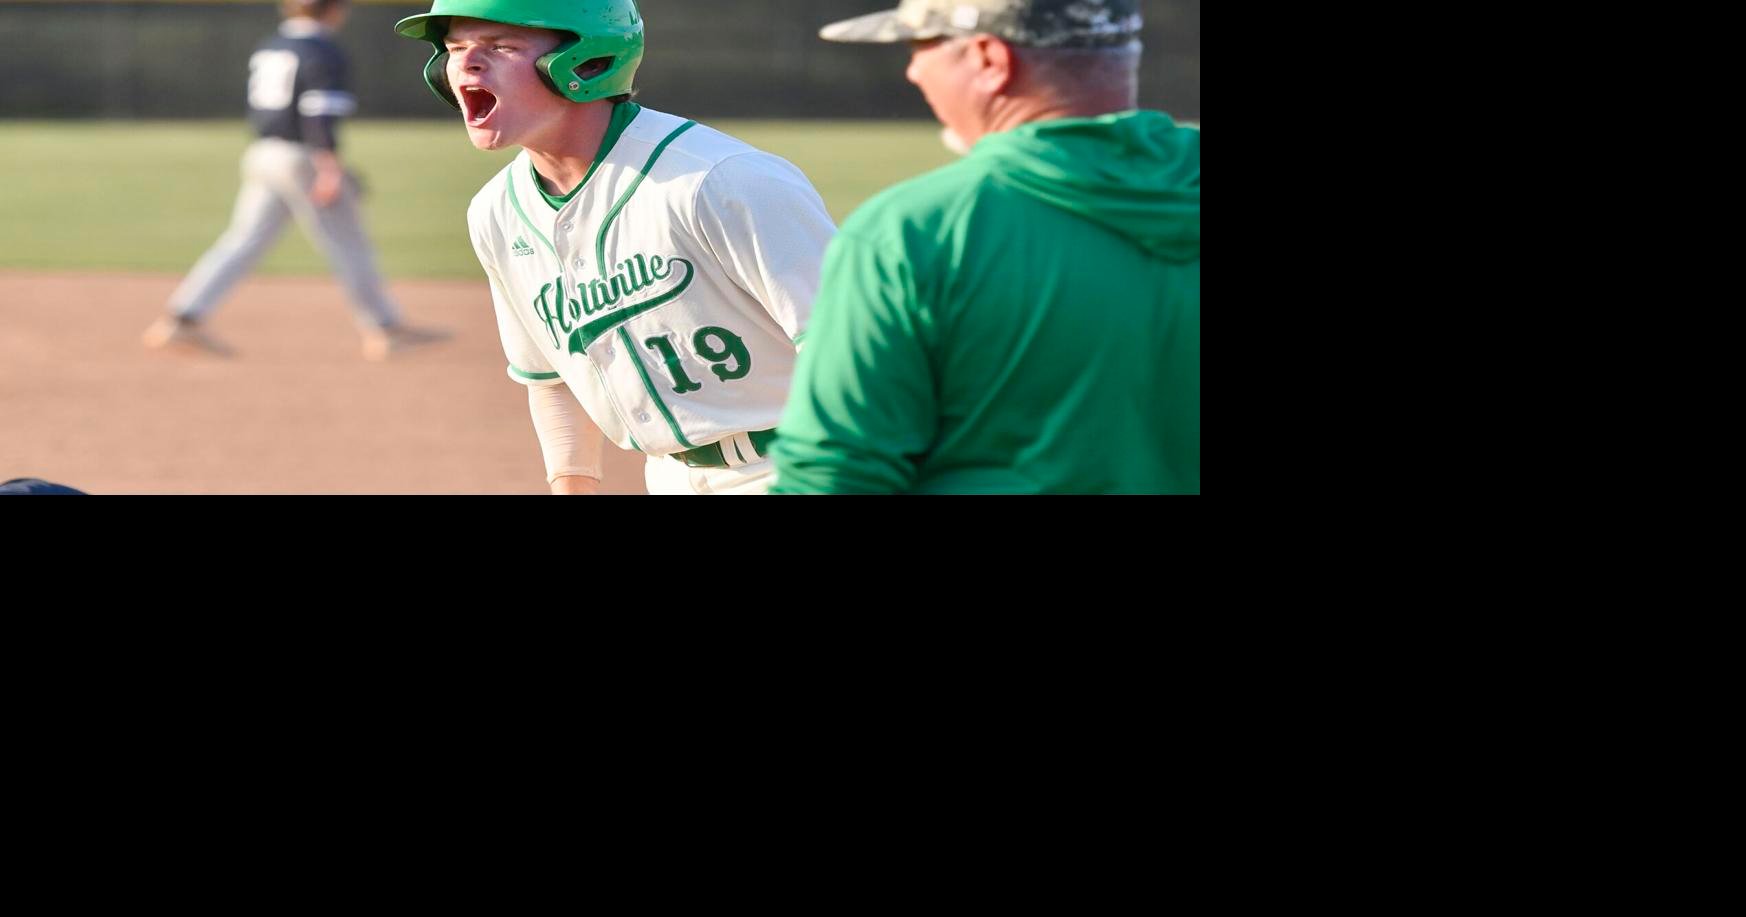 Holtville Baseball Claims Fourth Consecutive Victory Over Headland in